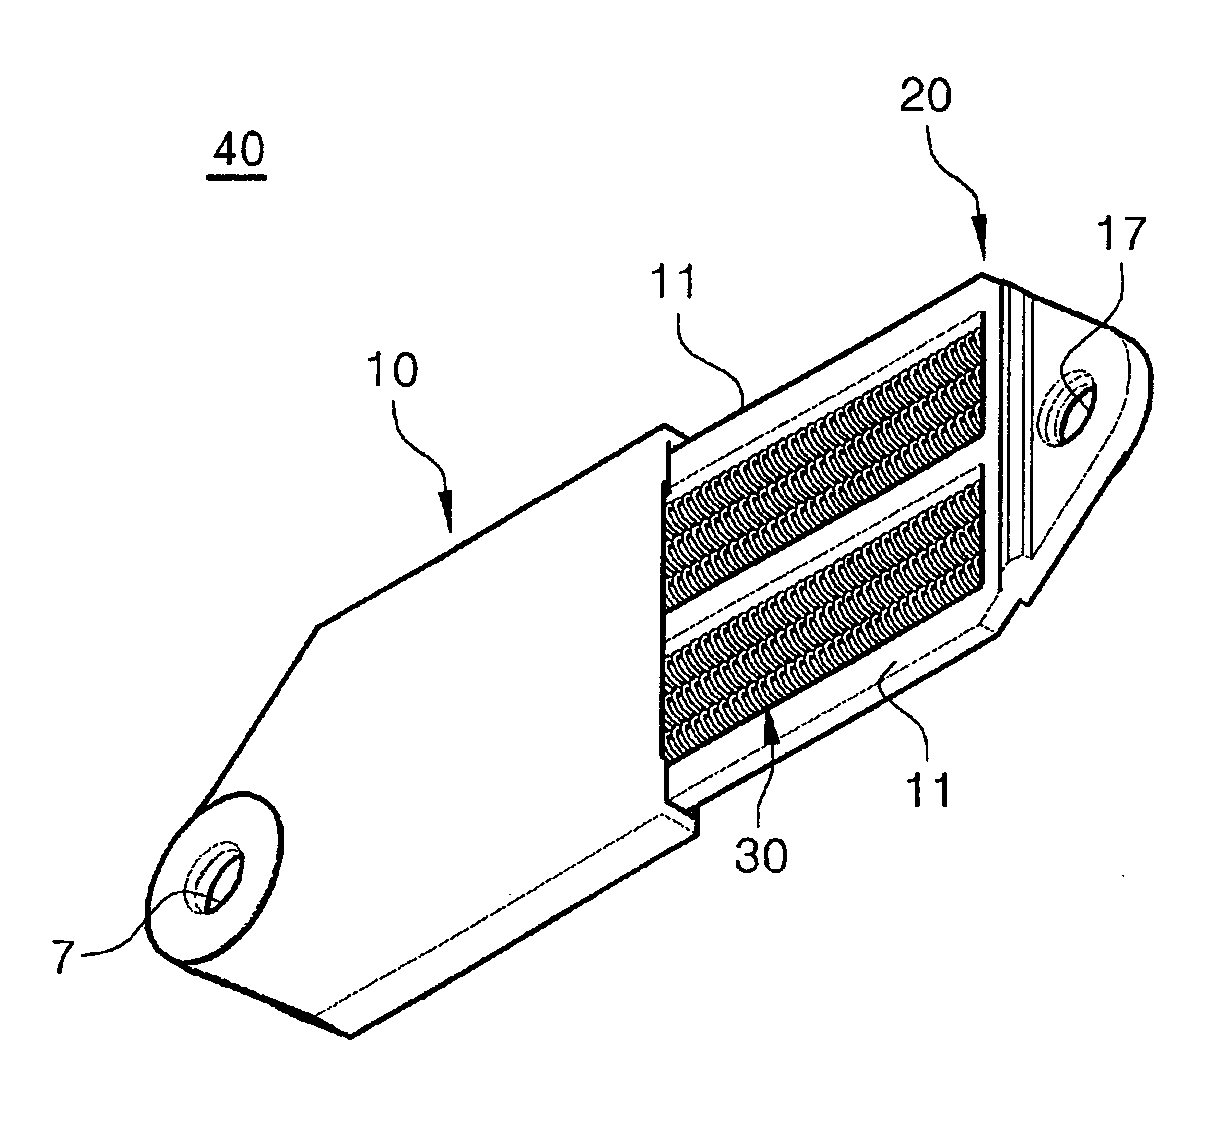 Link assembly with springs which can be extended and contracted and slider assembly having it